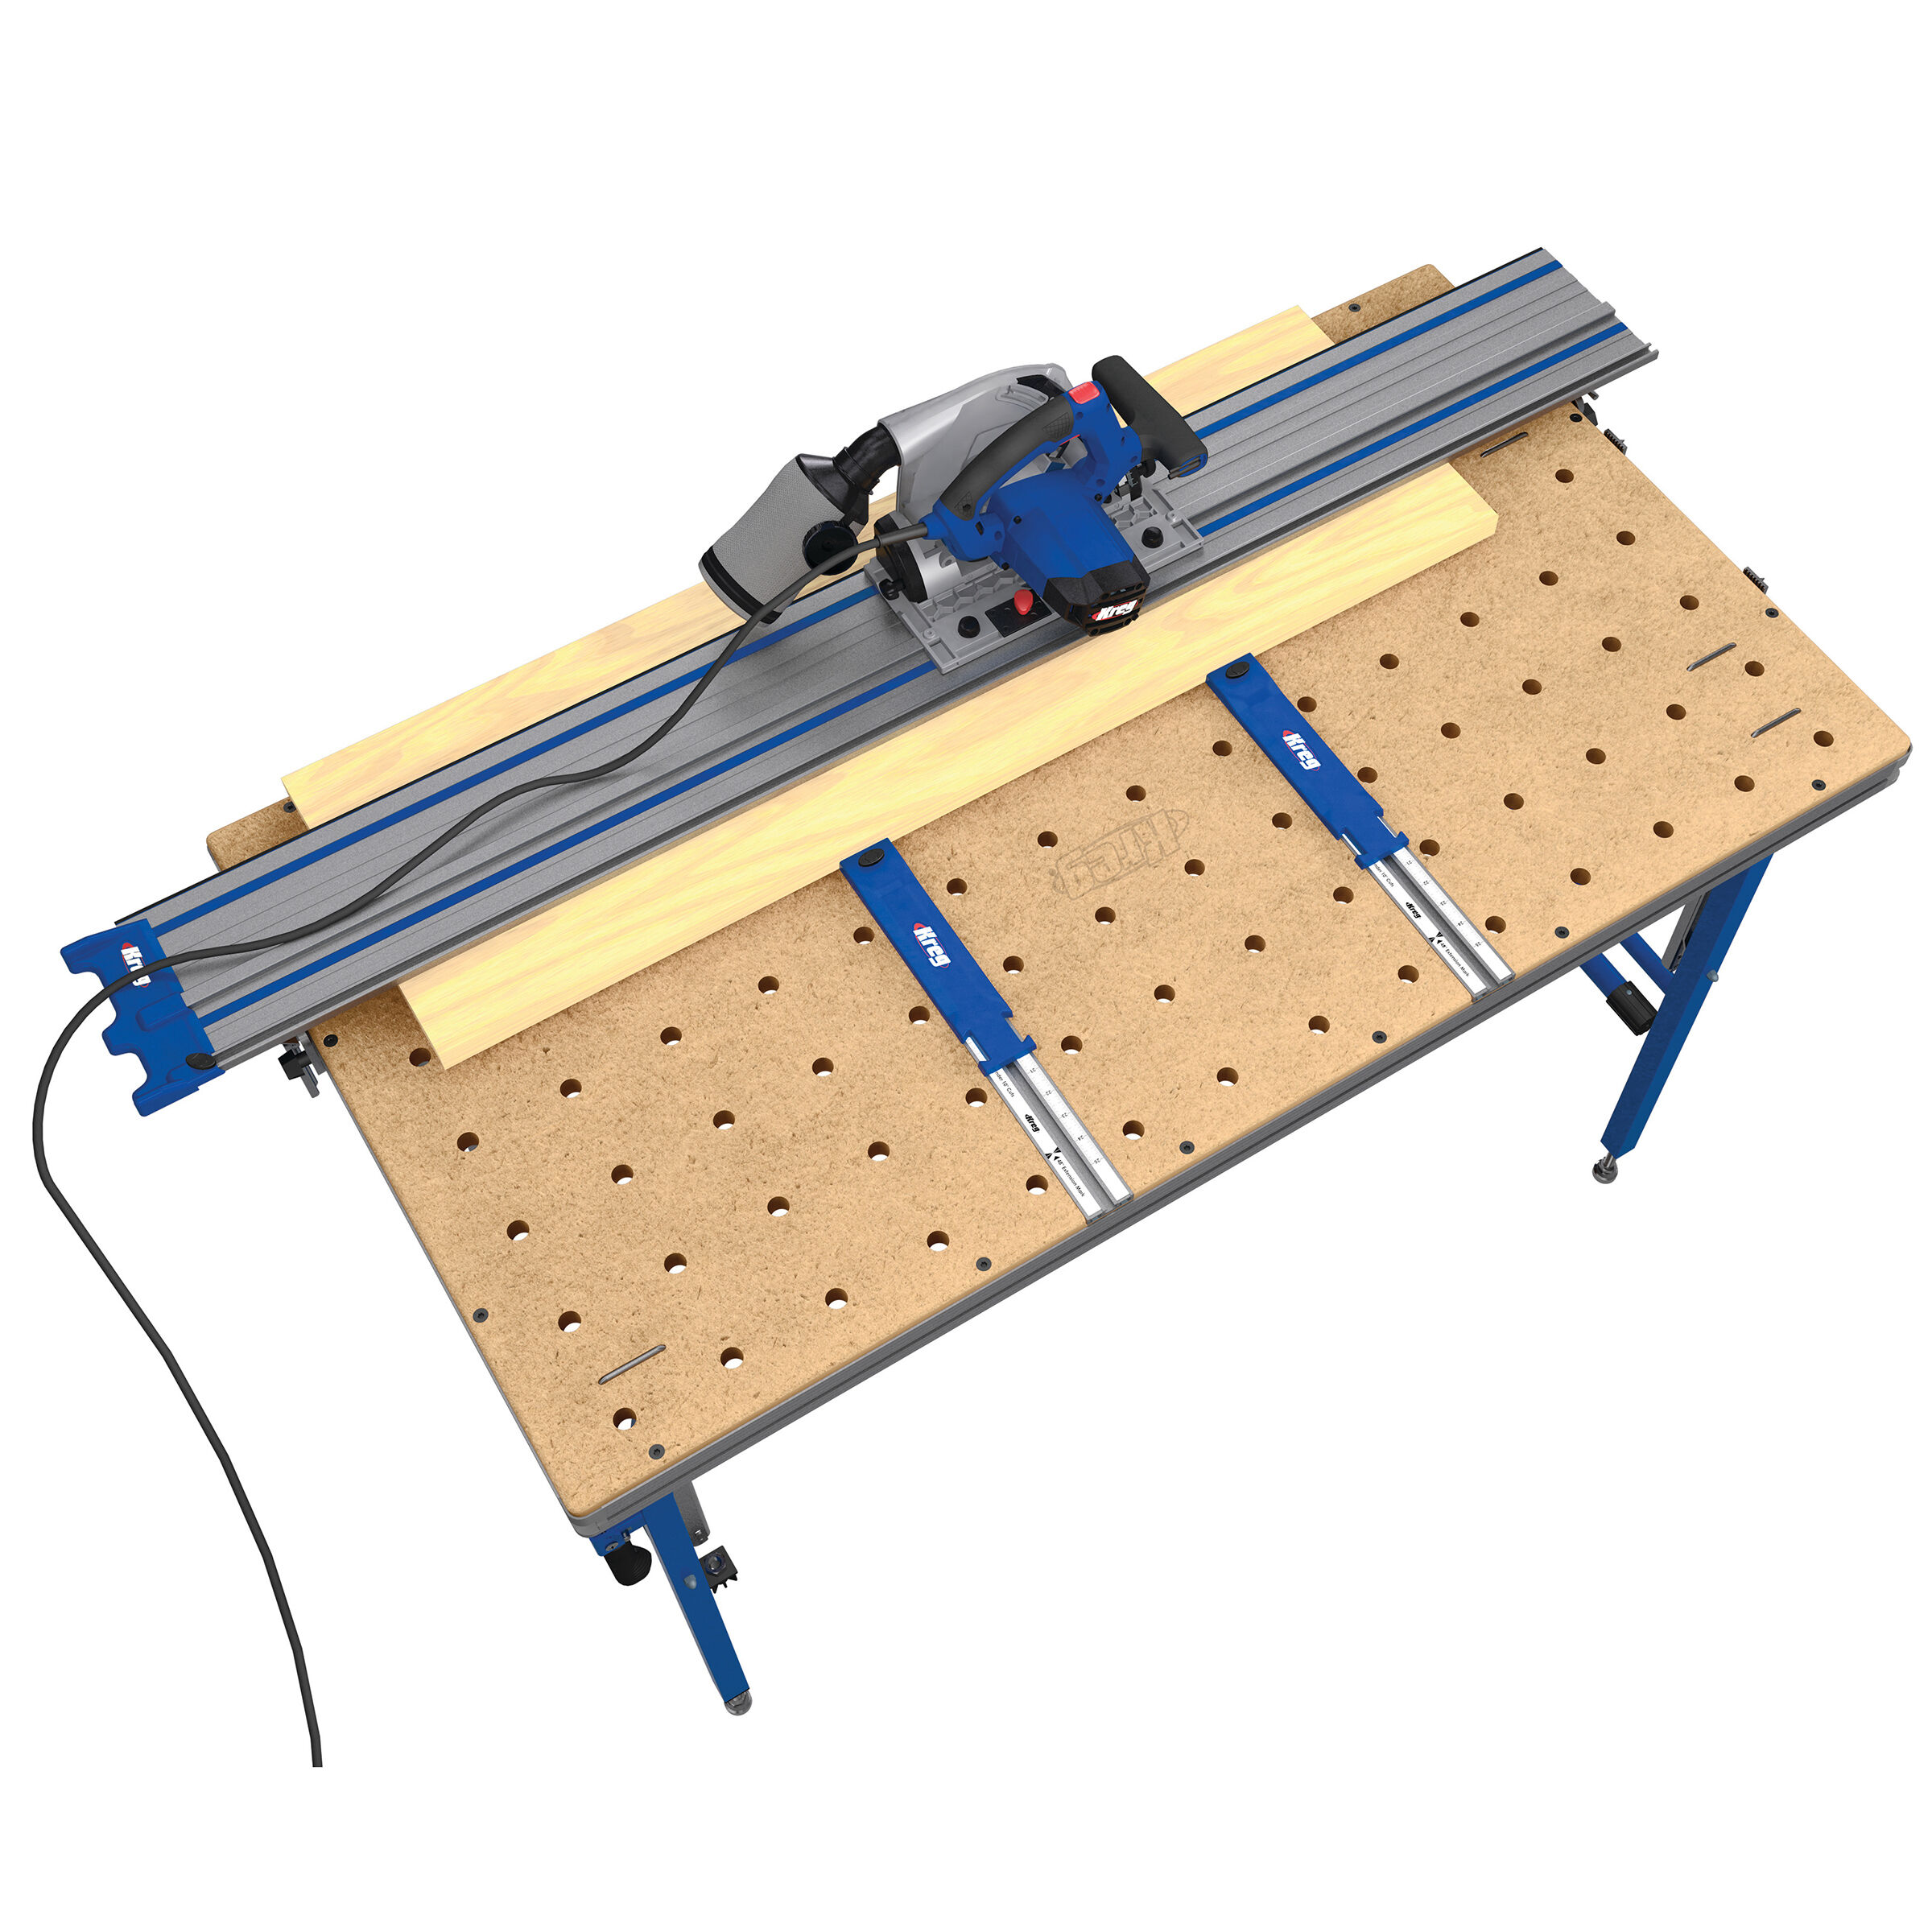 Adaptive Cutting System Base Project Table